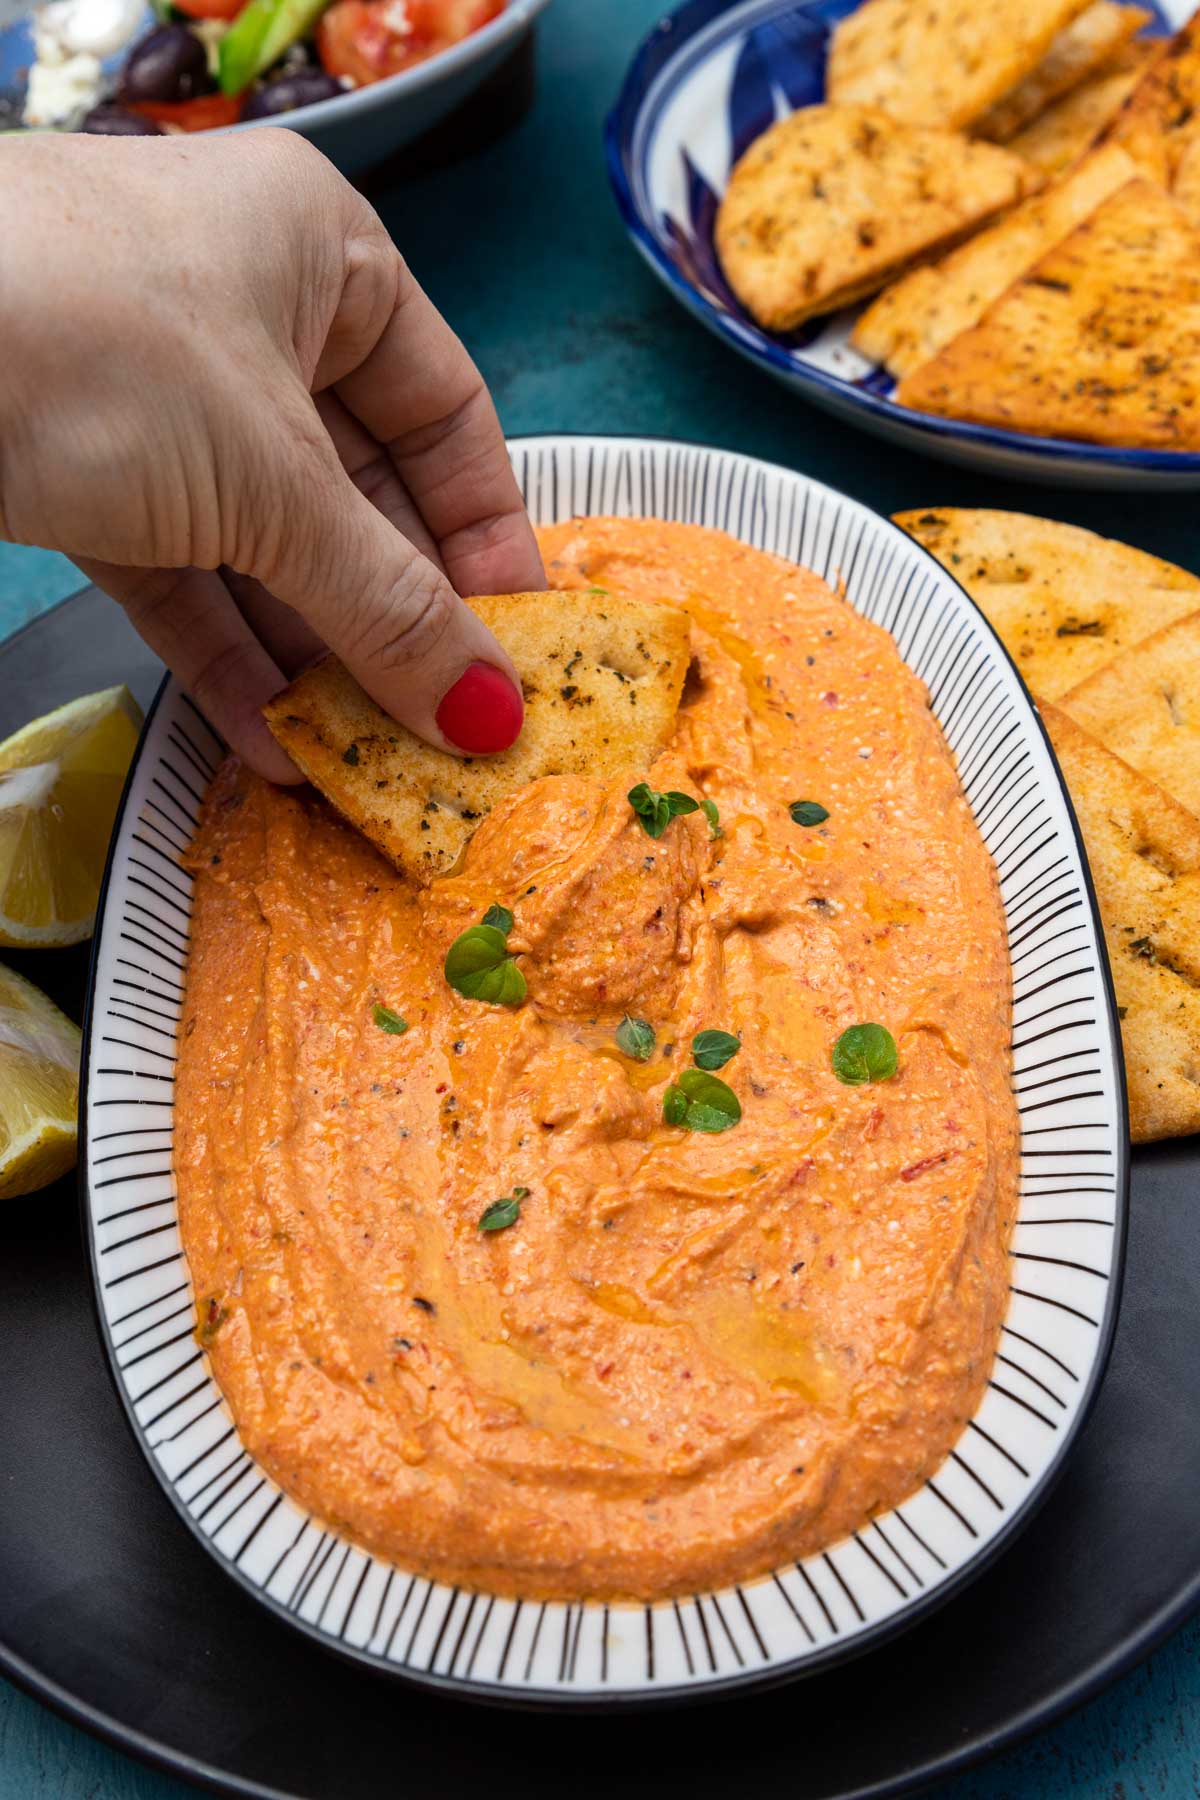 Someone scooping up spicy feta dip with a homemade pita chip from an oval shaped dish with black and white rim on a black plate and blue background with more pita chips in the background.